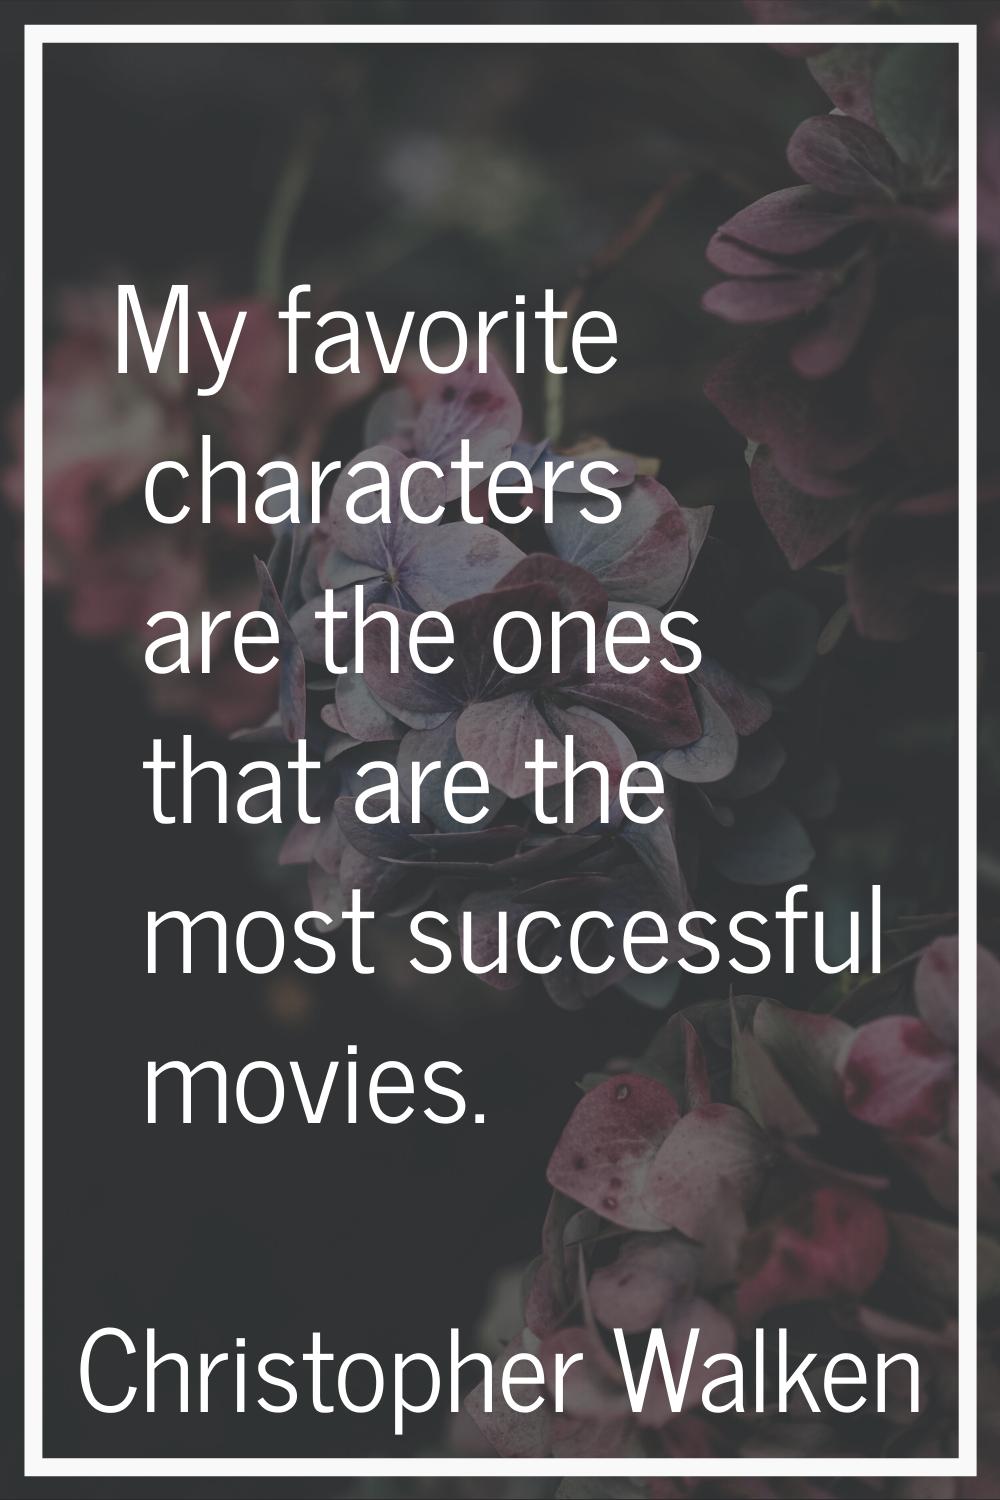 My favorite characters are the ones that are the most successful movies.